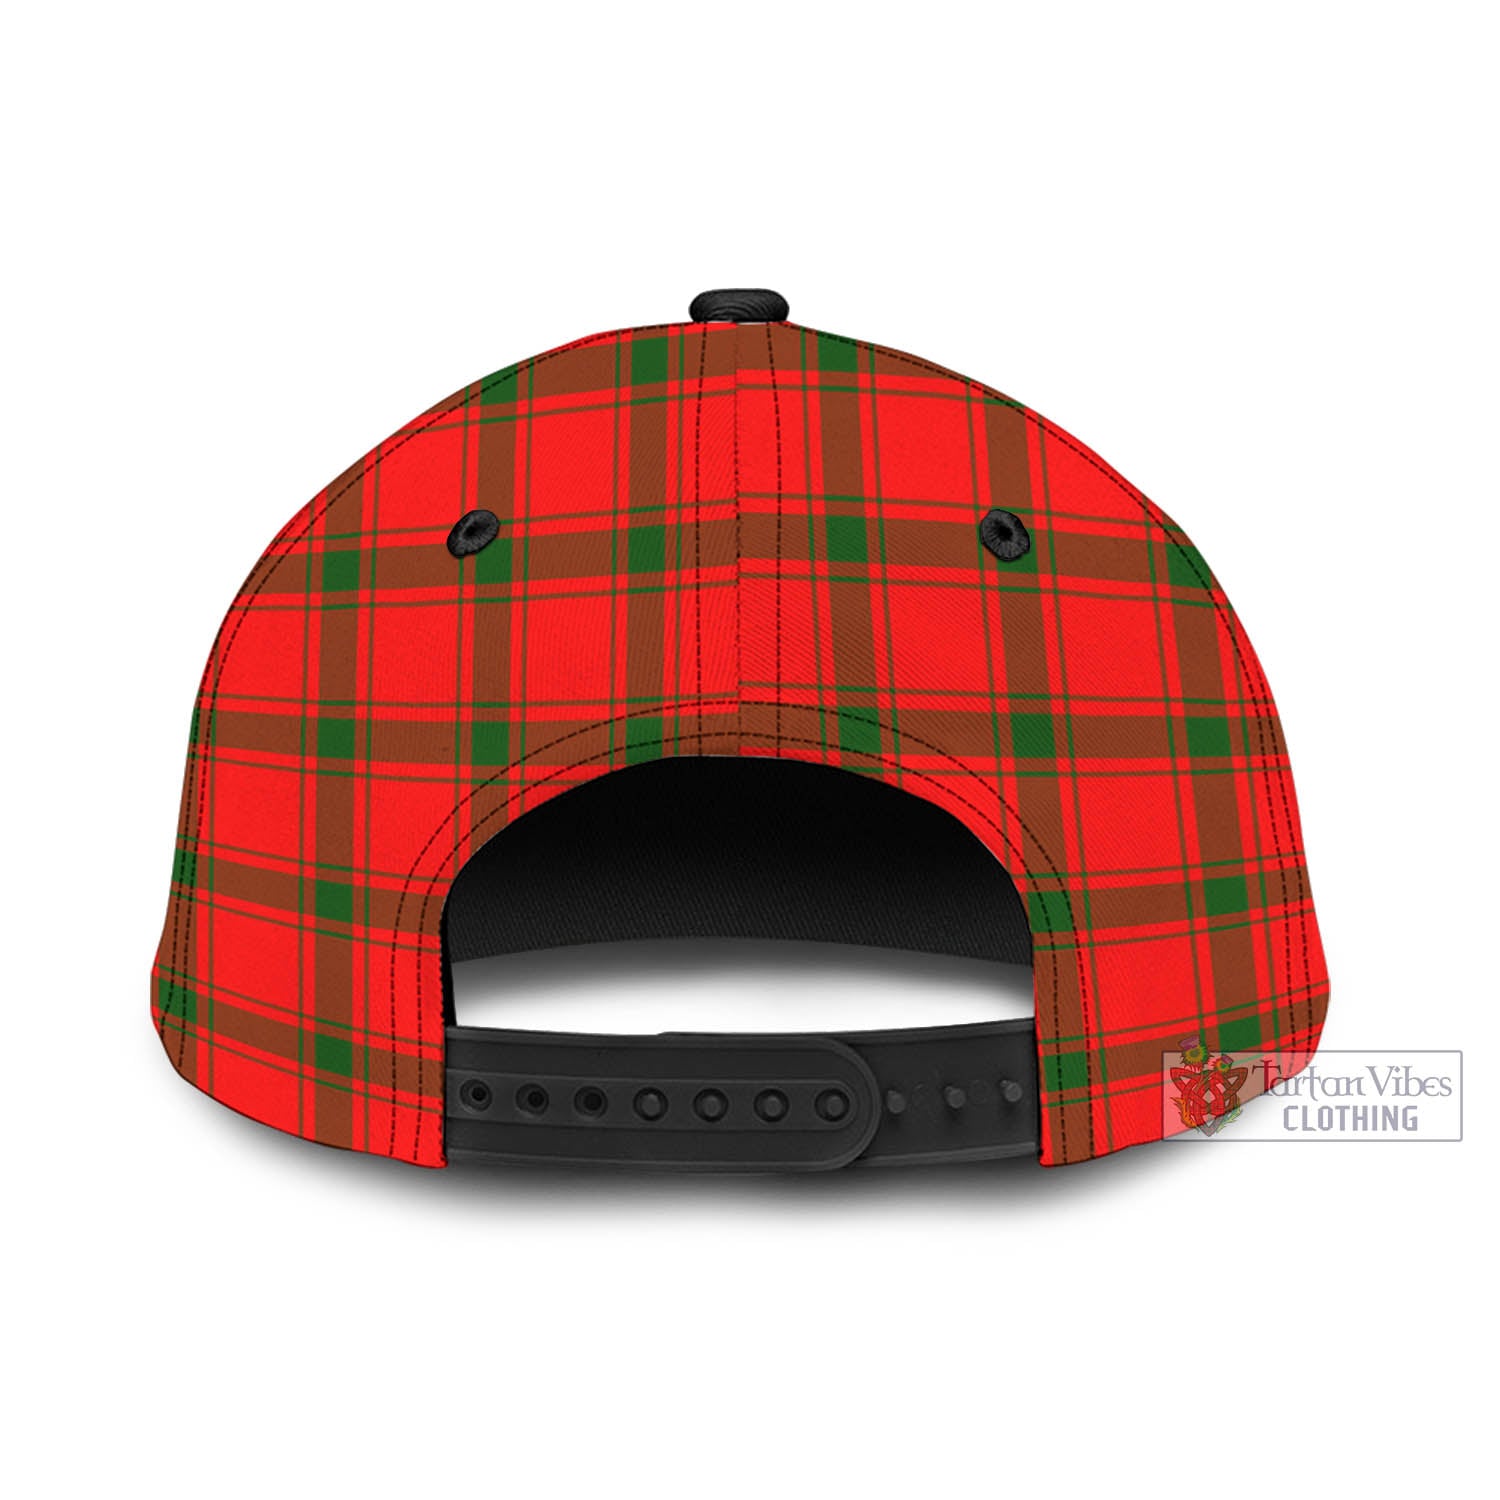 Tartan Vibes Clothing Darroch Tartan Classic Cap with Family Crest In Me Style